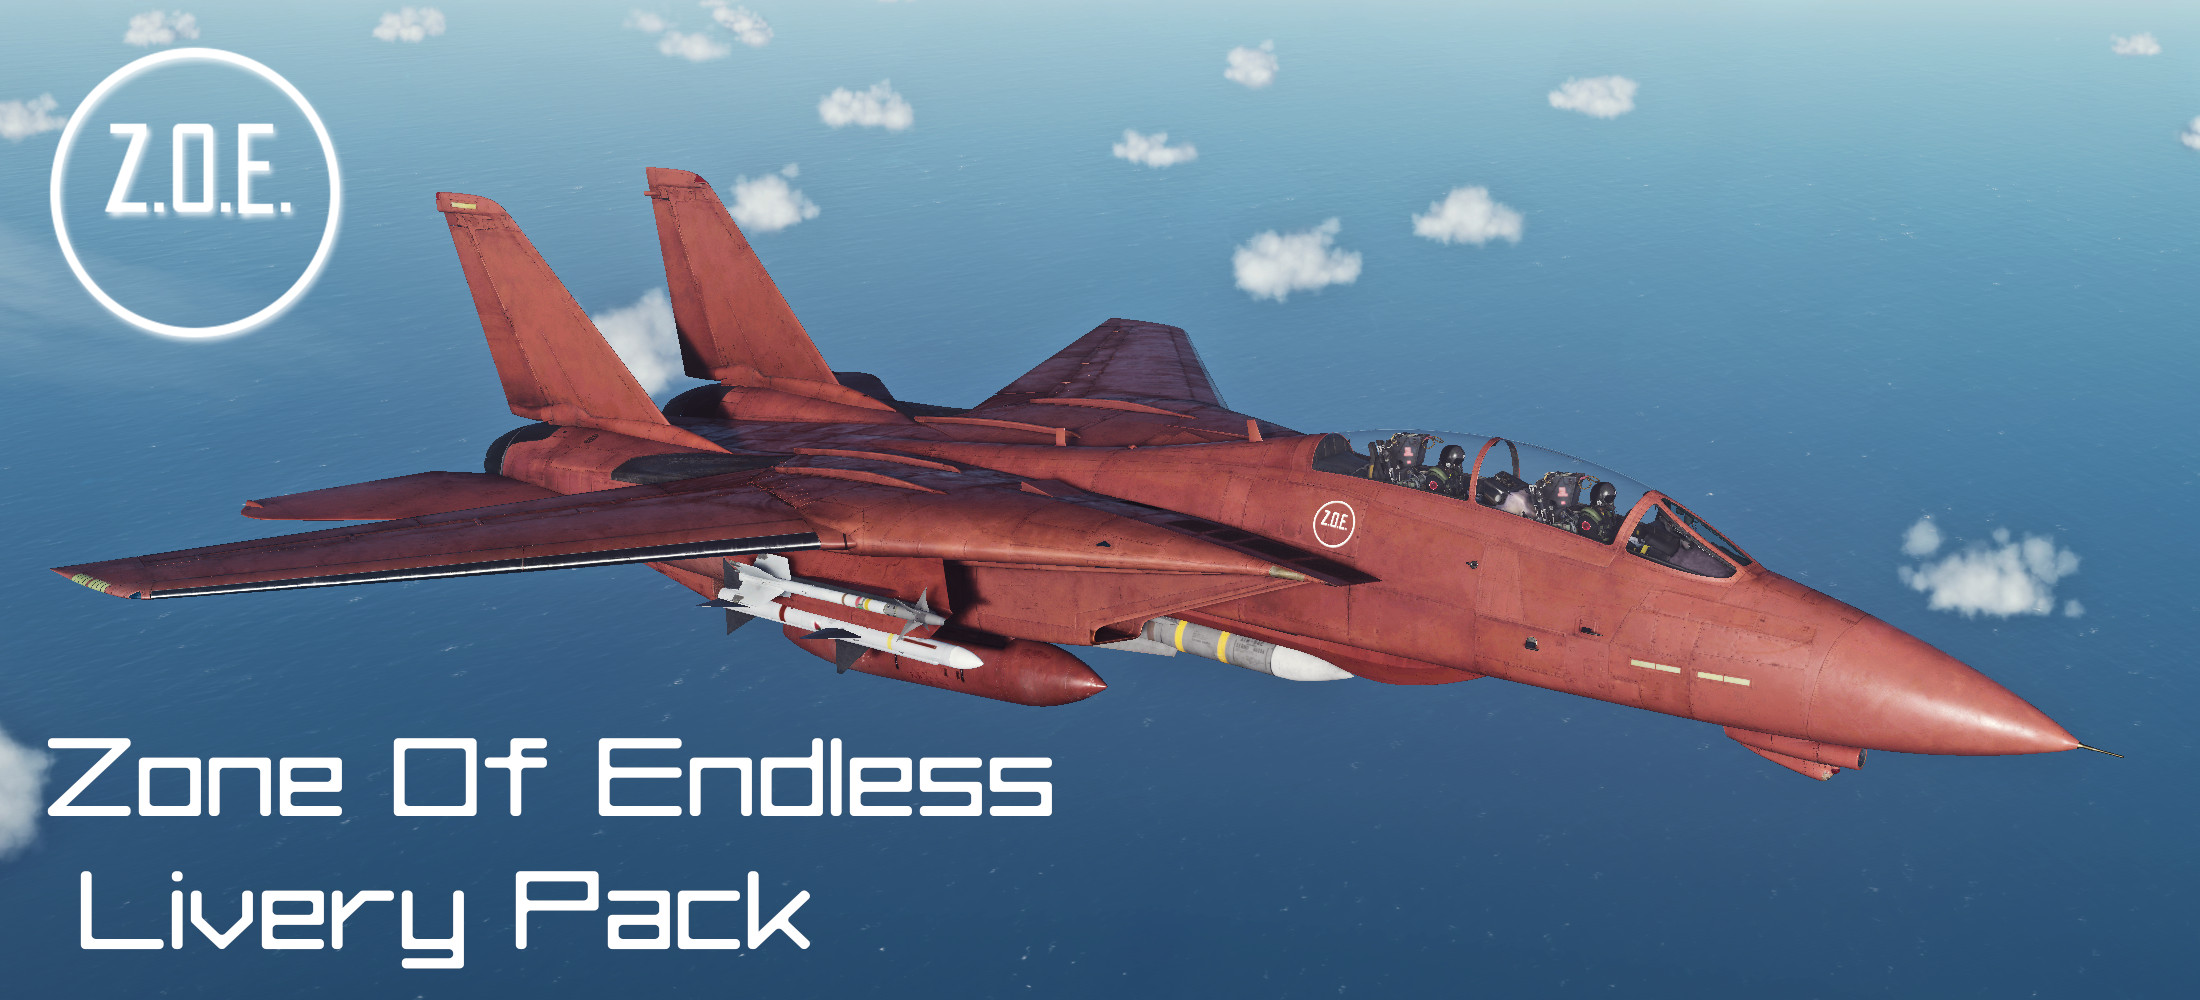 F-14B - Ace Combat 2: Zone Of Endless Livery Pack